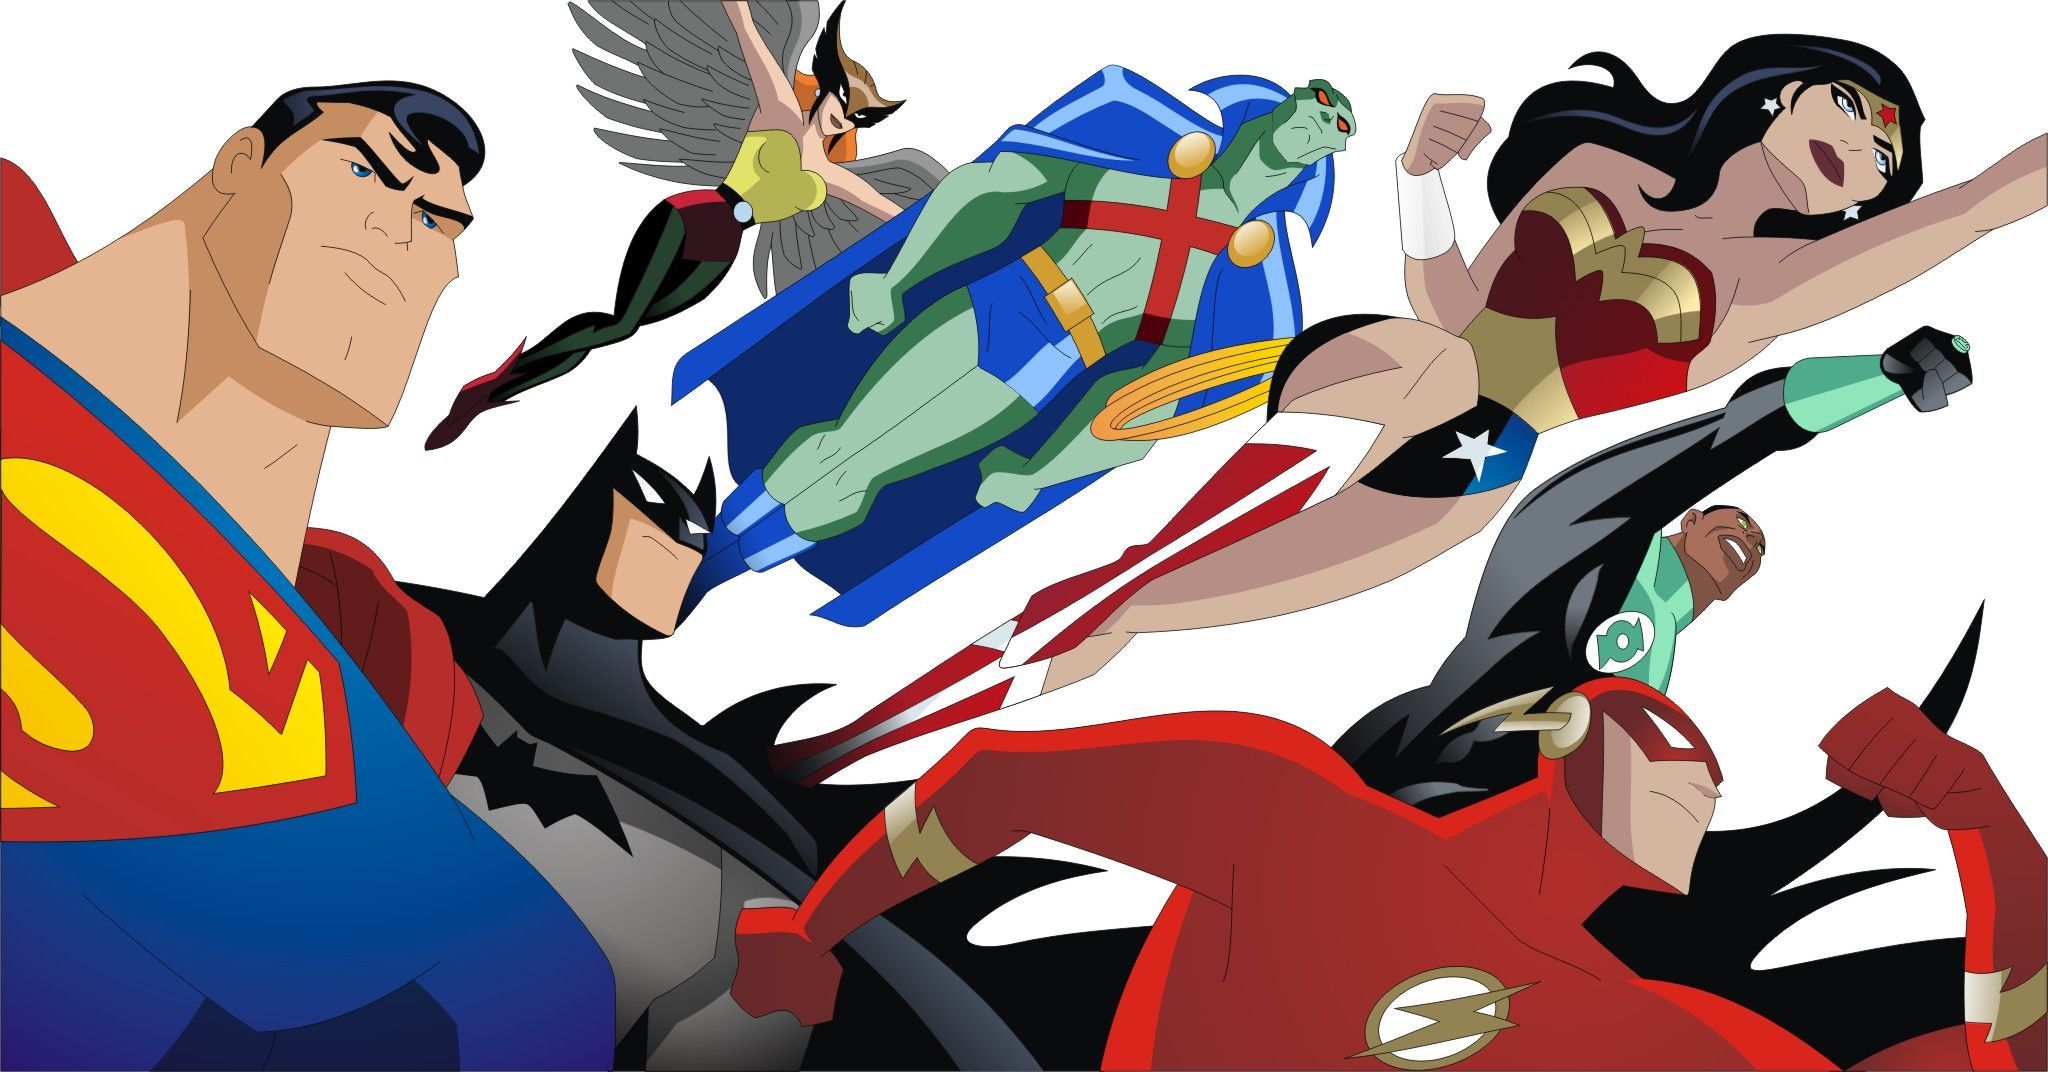 New Justice League Animated Series Coming to Cartoon Network